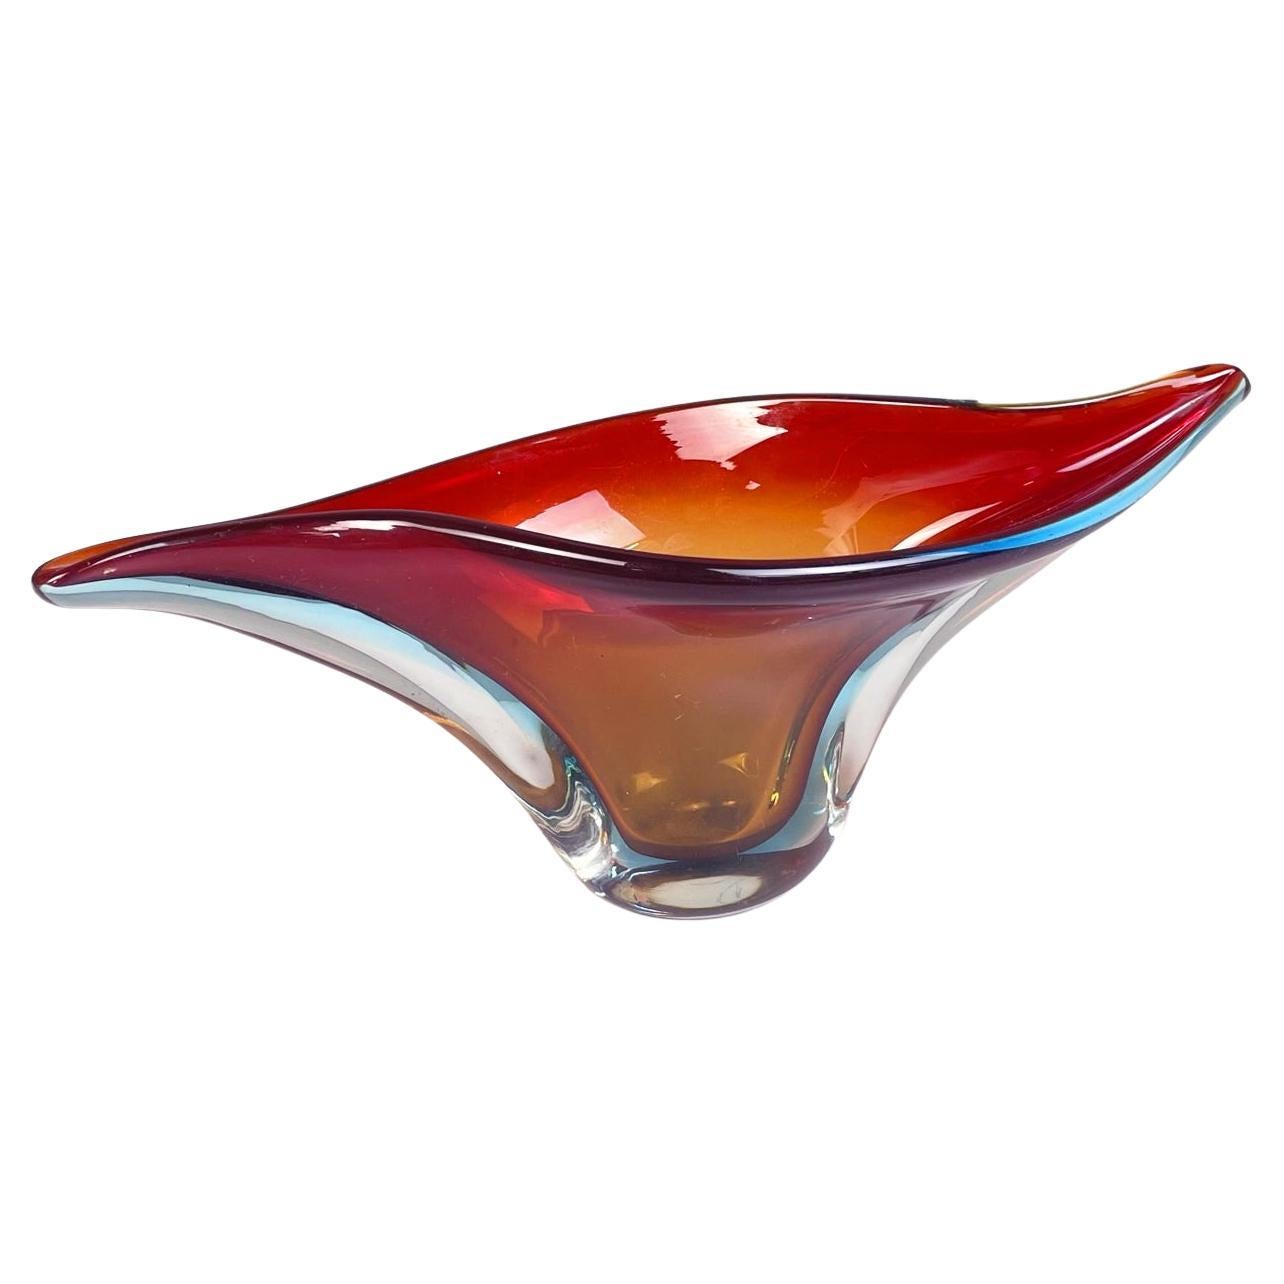 Italian Midcentury Centerpiece in Yellow, Red and Blue Murano Glass, 1960s